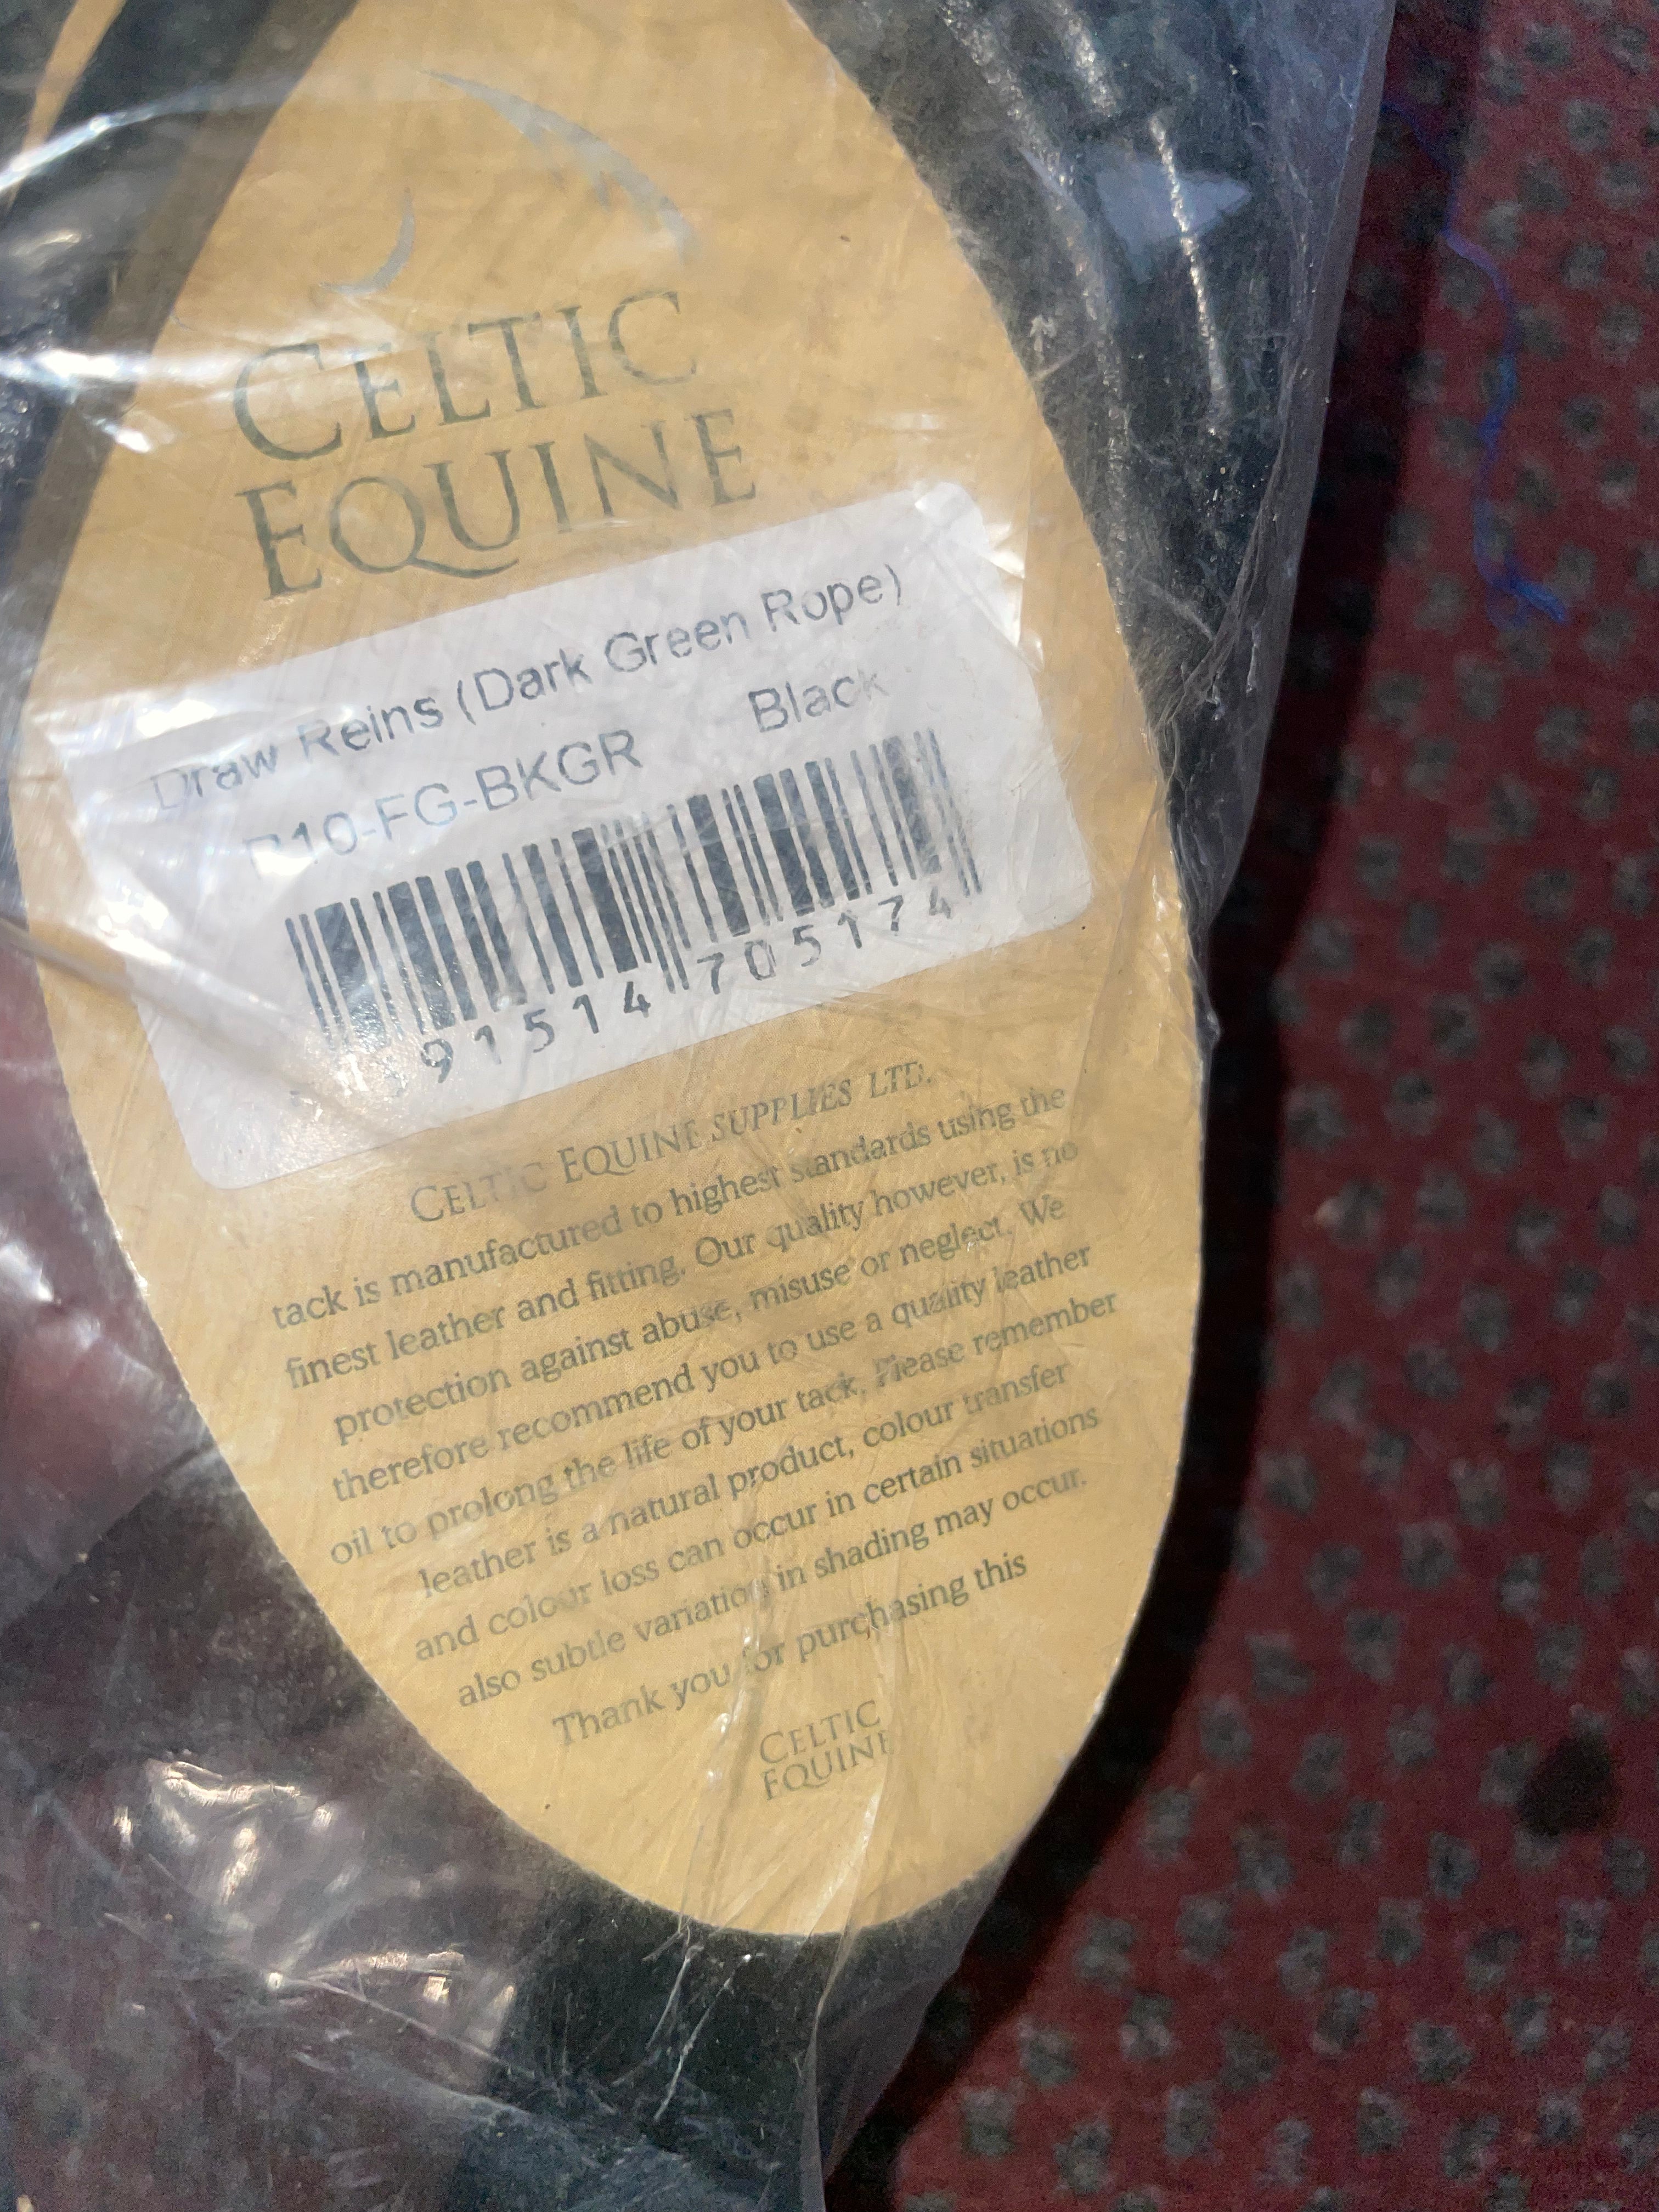 Celtic Equine Rope & Leather Draw Reins